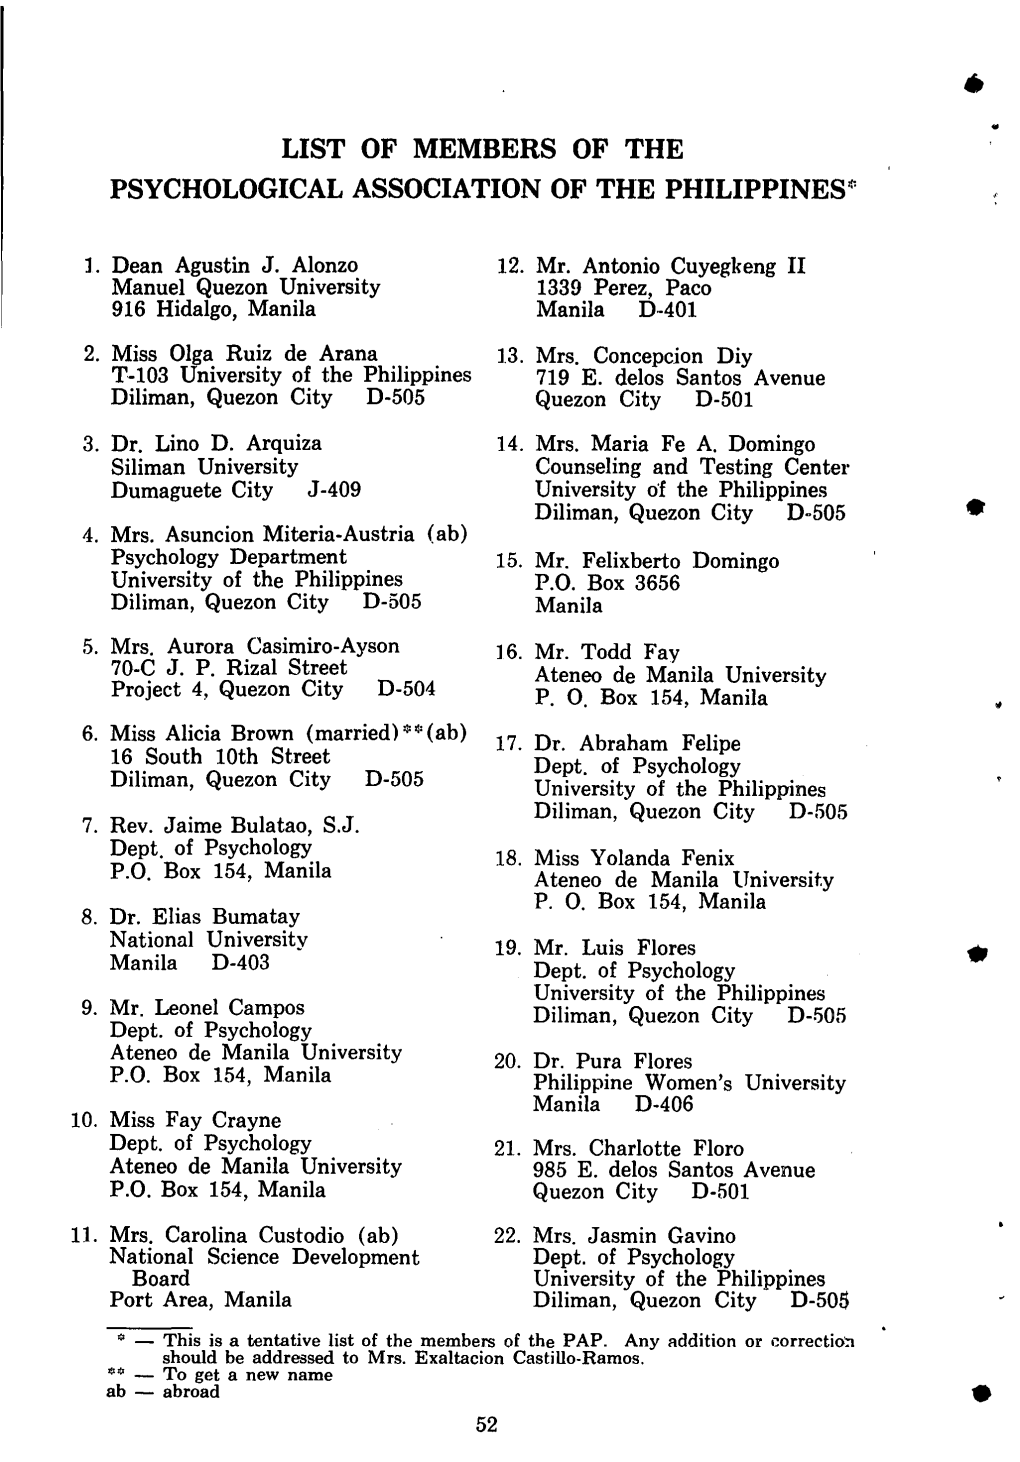 List of Members of the Psychological Association of the Philippines*